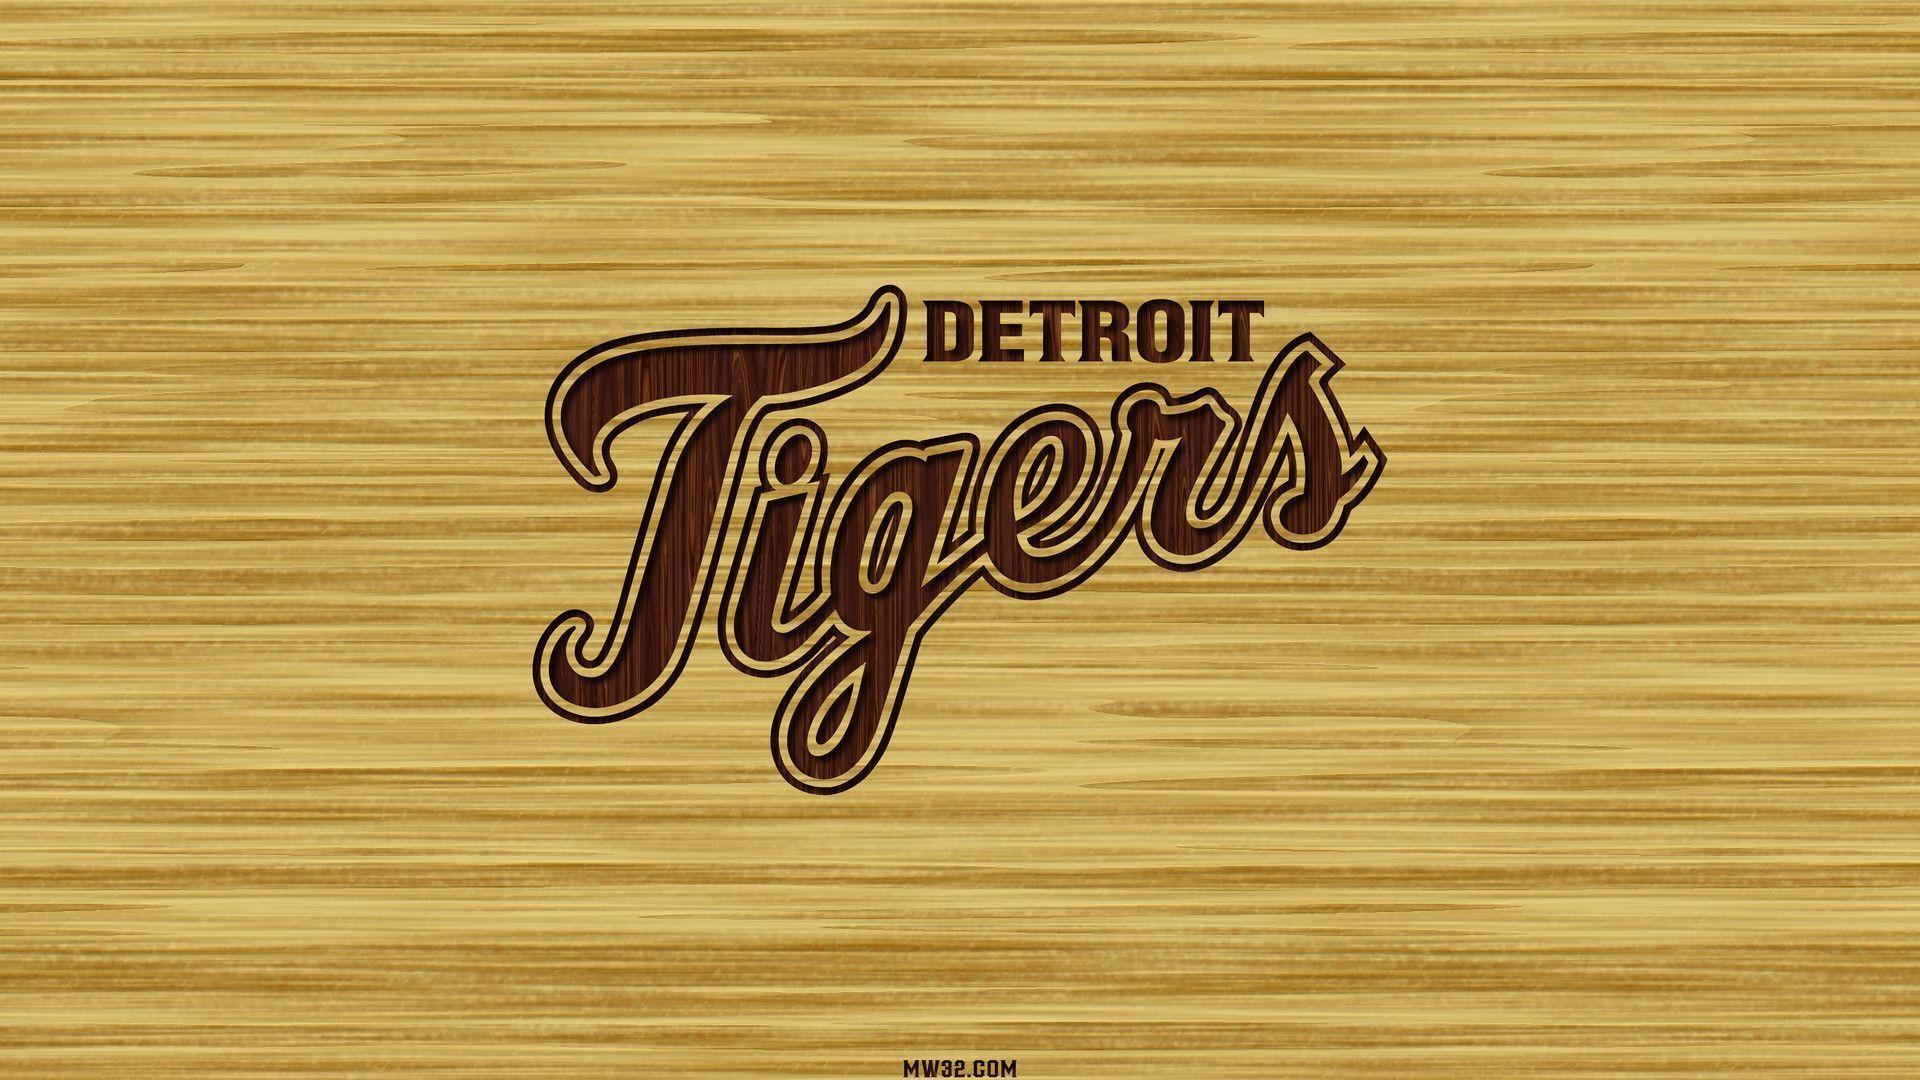 MonkeyWrench32 » Tigers Carved Wood